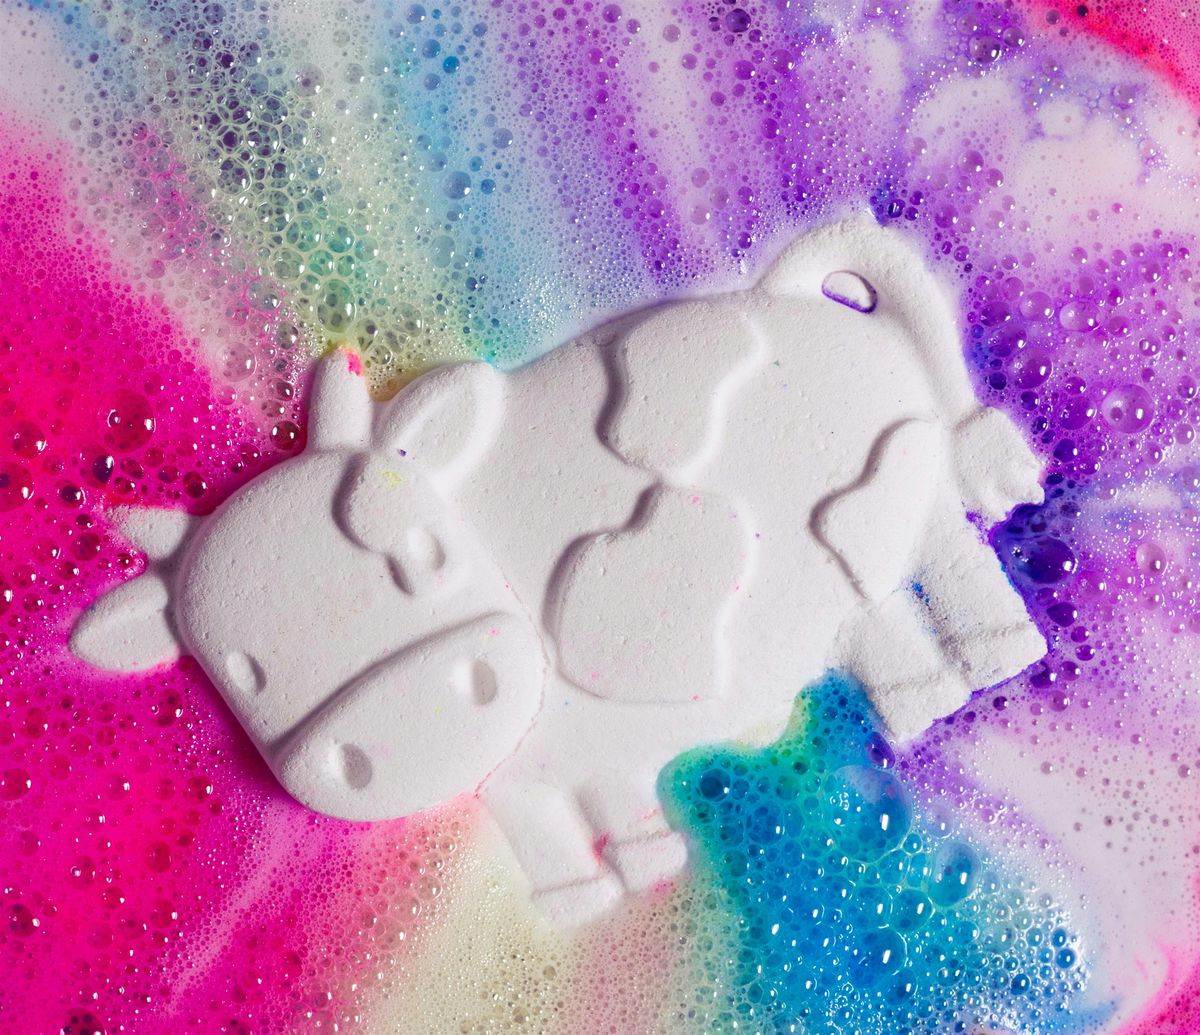 LUSH NEWCASTLE -After School Club - Toby's Magic Cow Product Making